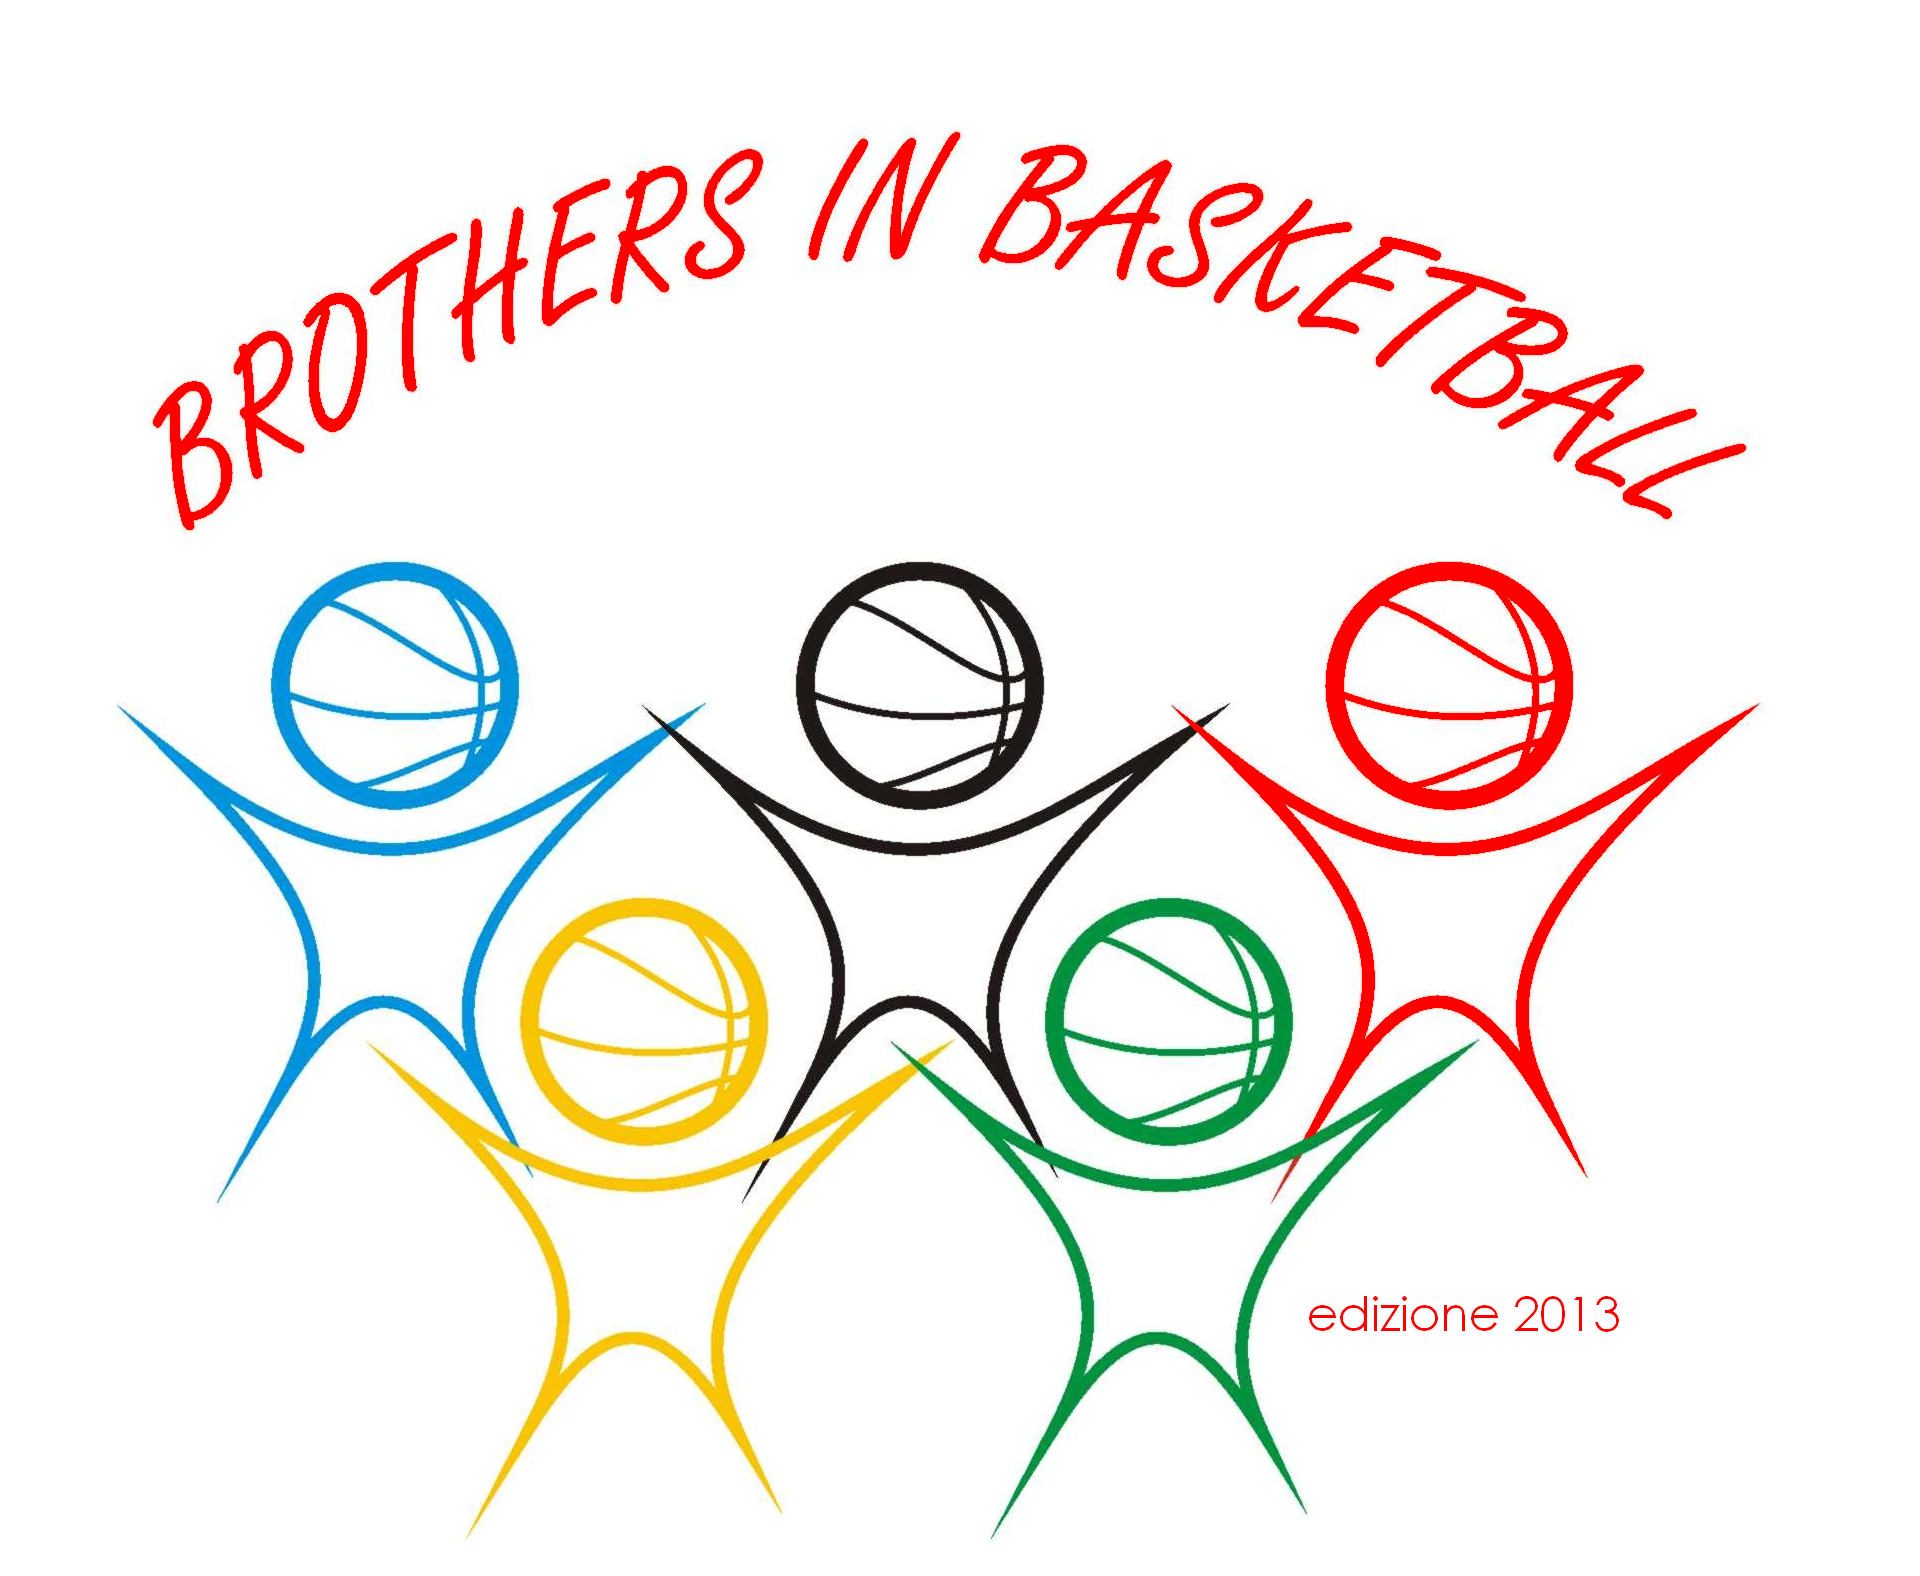 Brothers in basketball